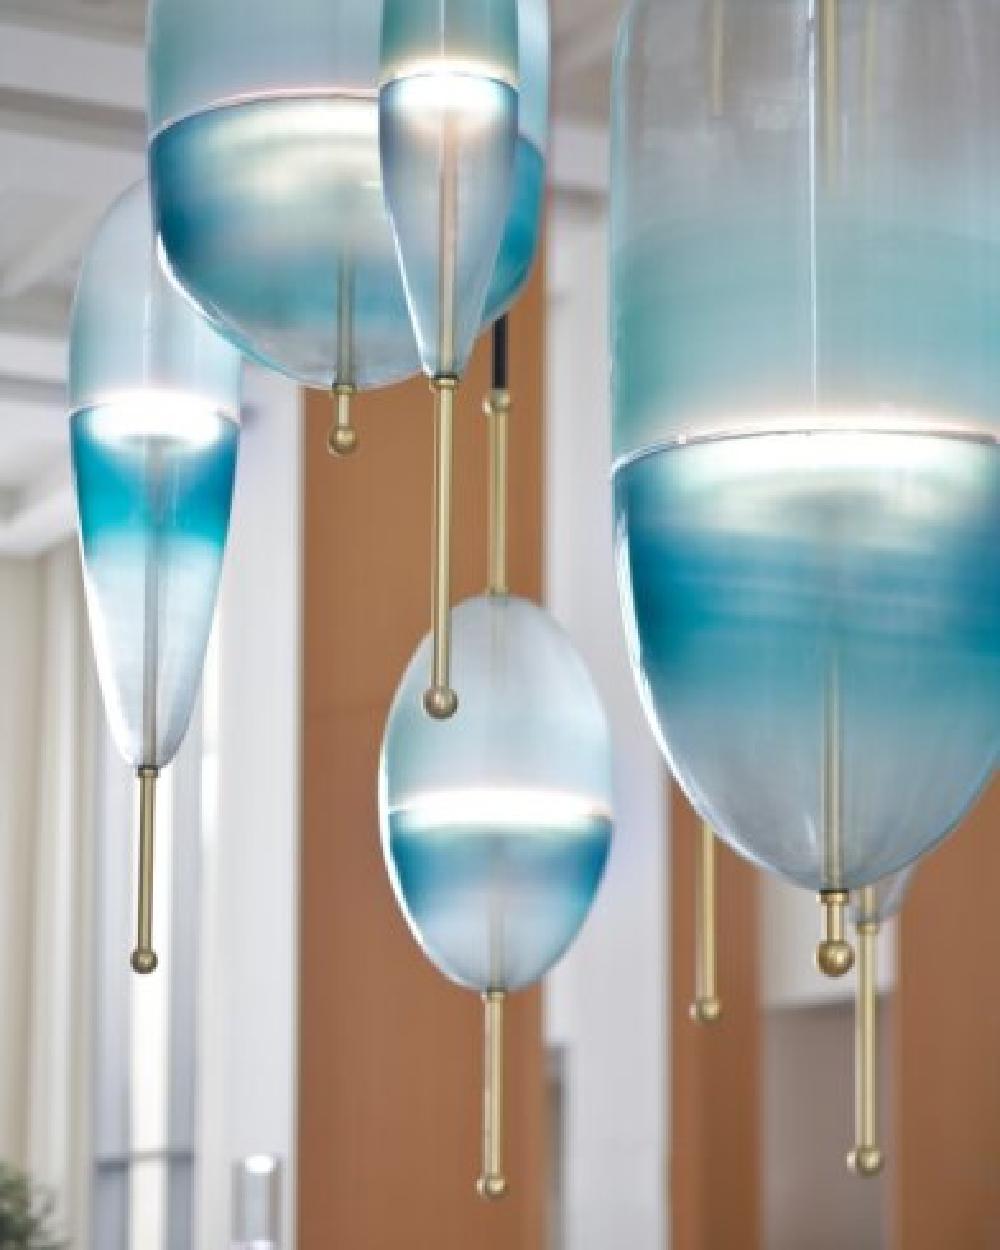 FLOW[T] S4 Pendant lamp in Turquoise by Nao Tamura for Wonderglass For Sale 2